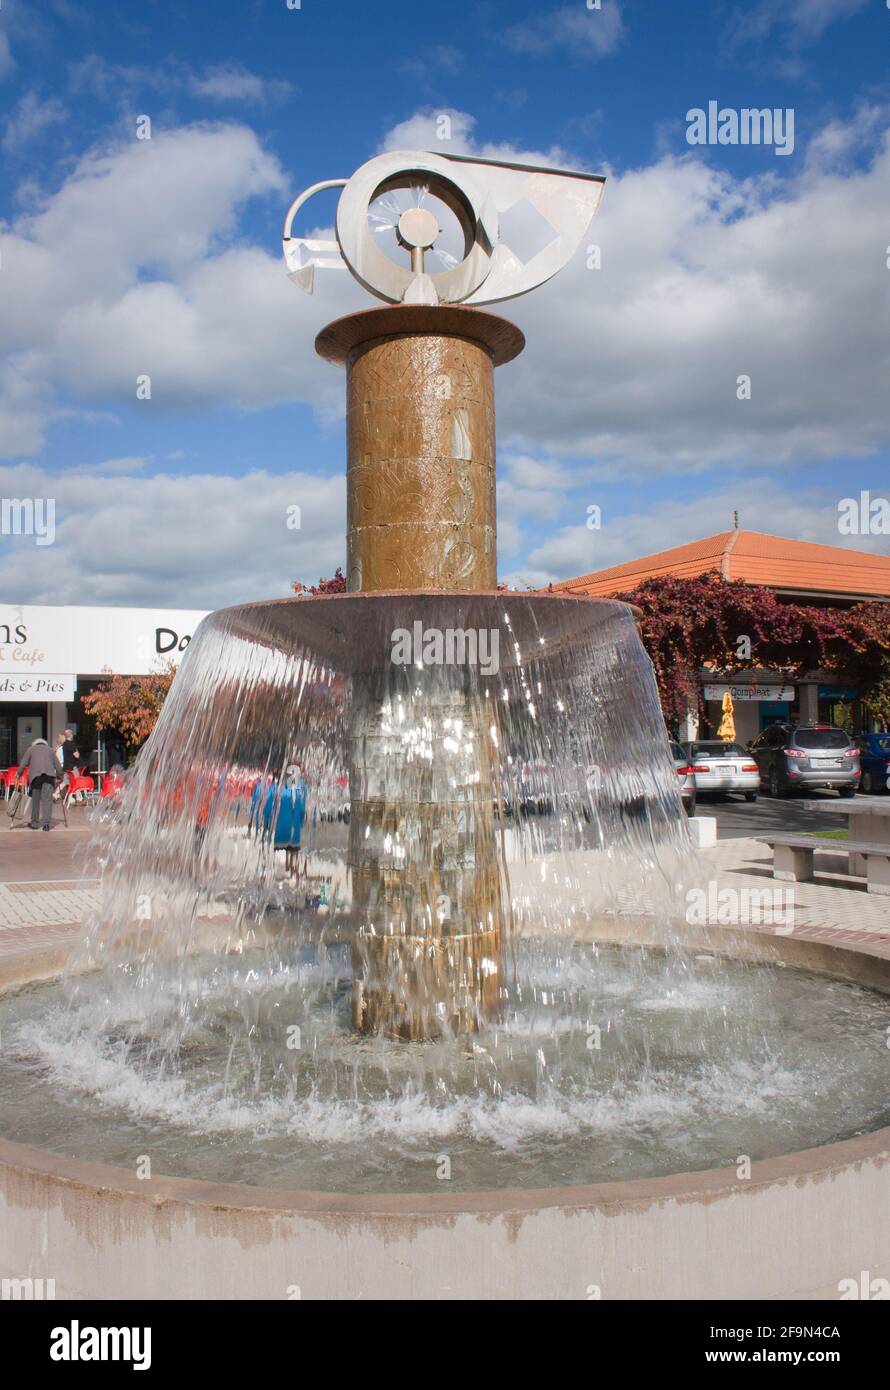 Havelock North, New Zealand - Apr 21st 2017: Fountain in the centre of the town of Havelock North. Stock Photo